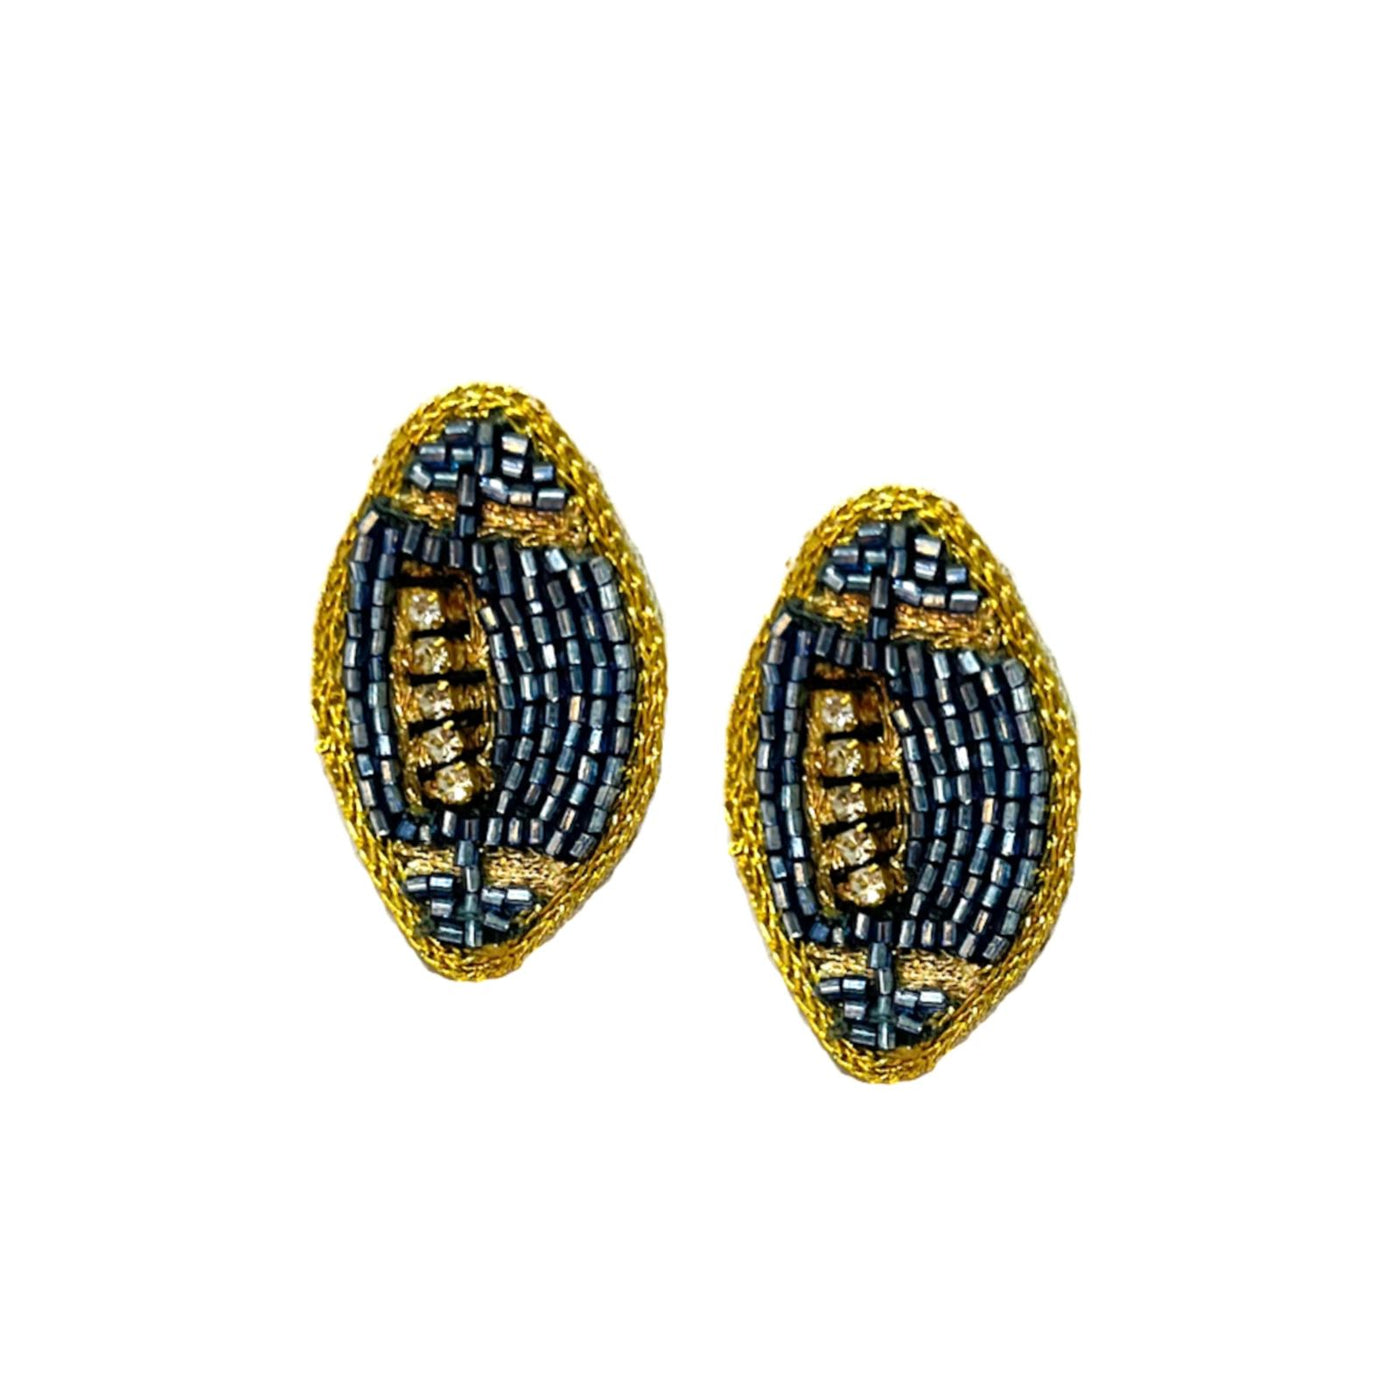 Football Stud Earrings - Blue and Gold